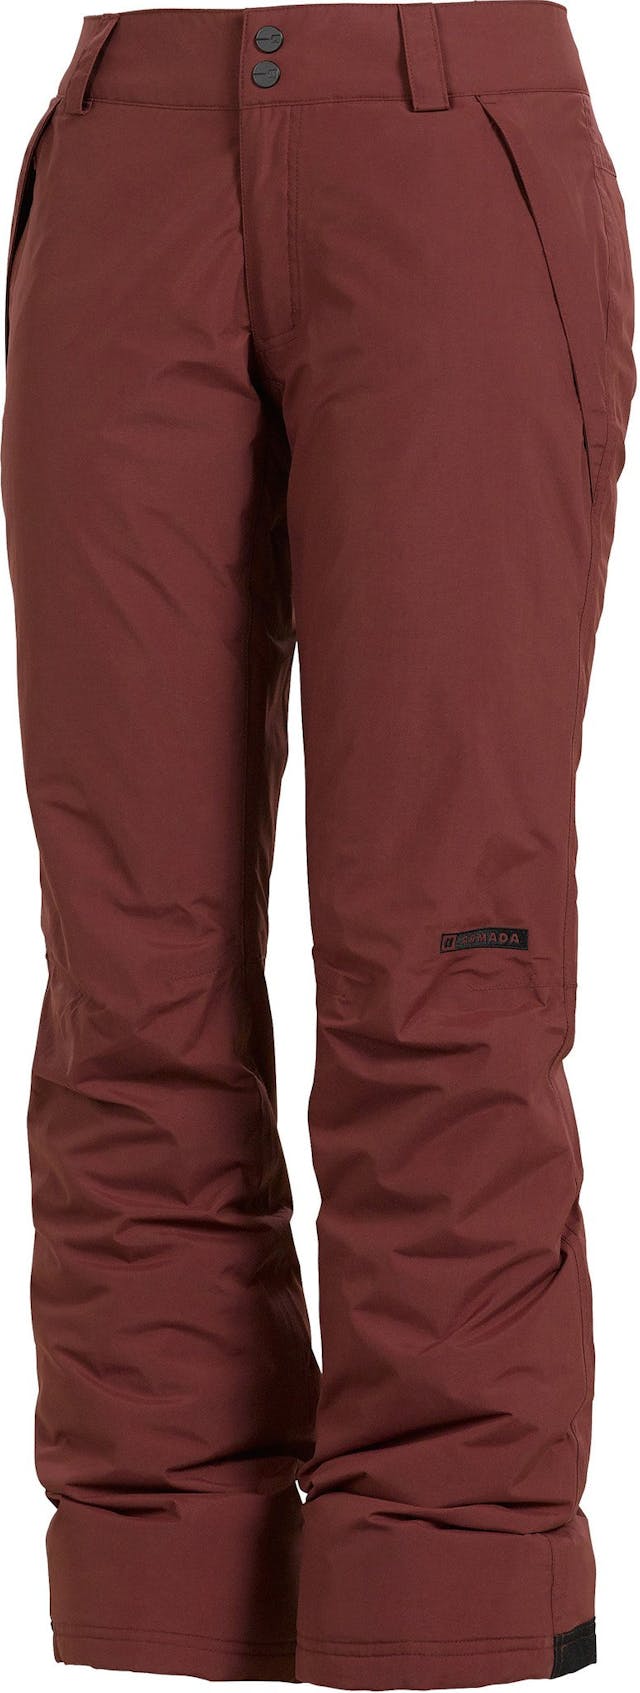 Product image for Brae Pant - Women's